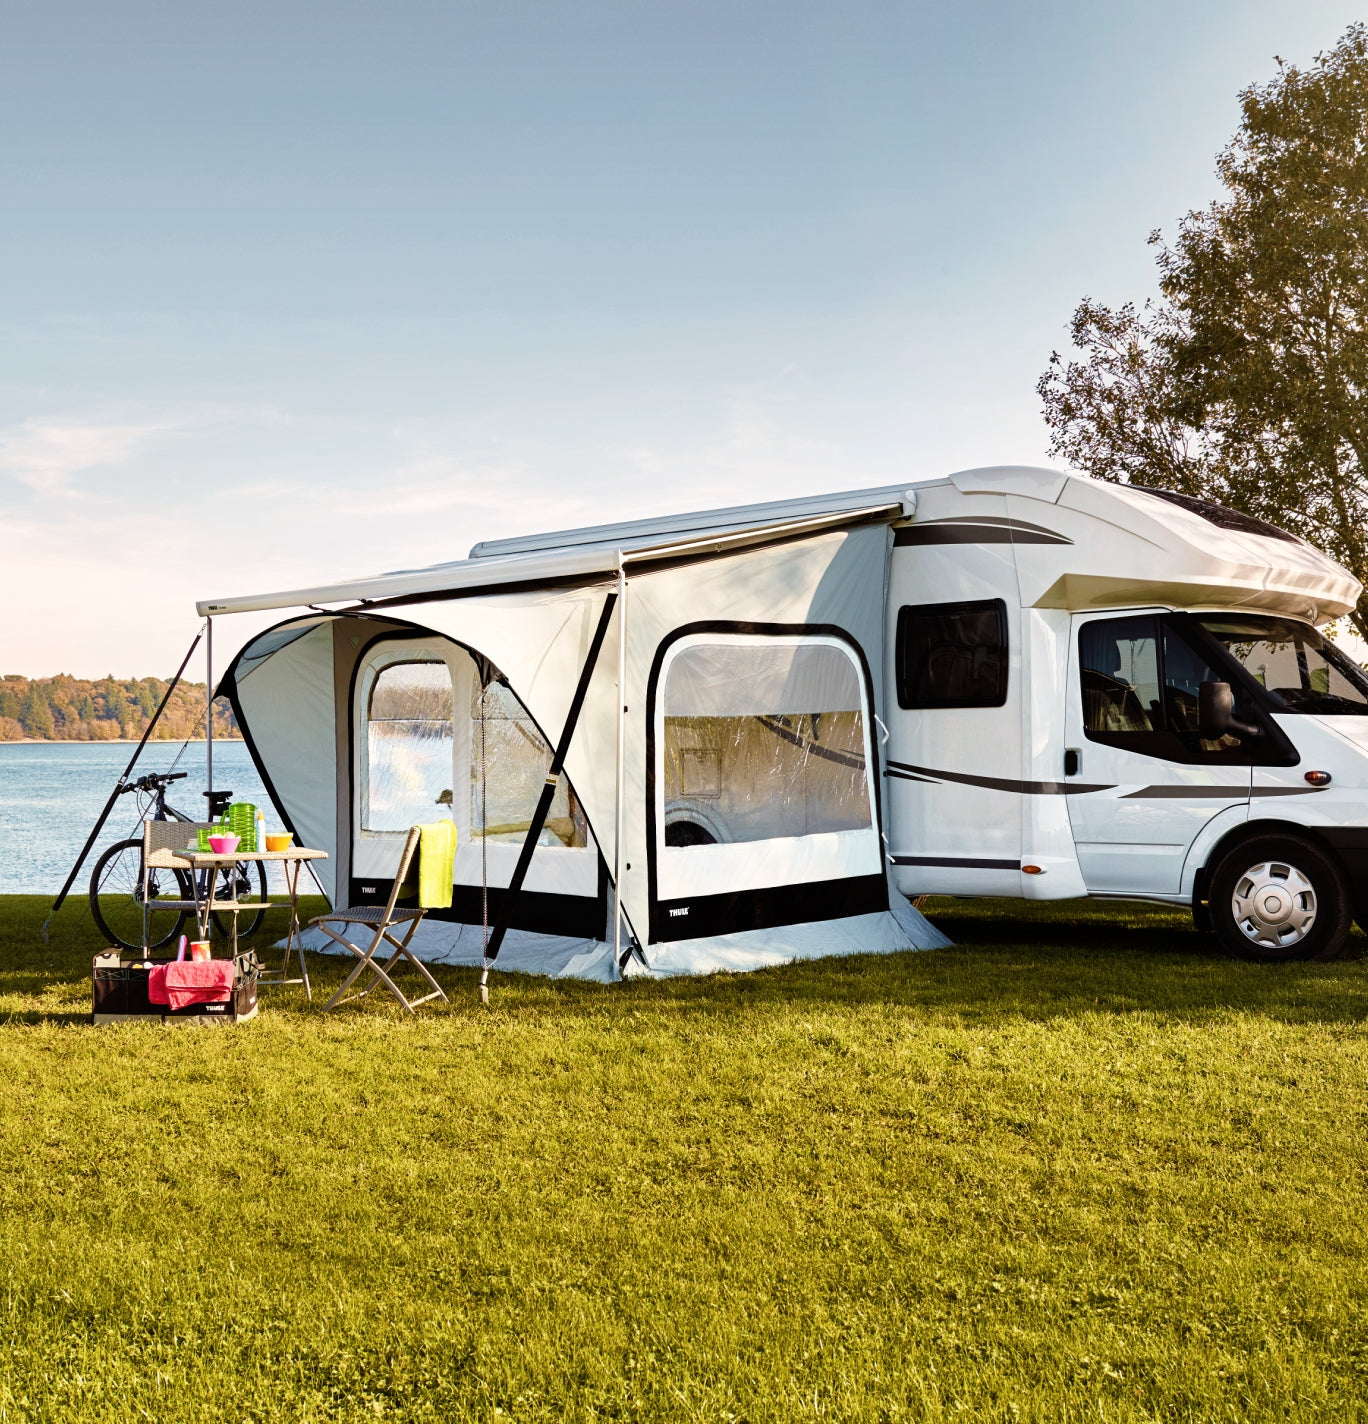 Thule QuickFit Awning Tent Privacy Room - 3.00m Ducato H2